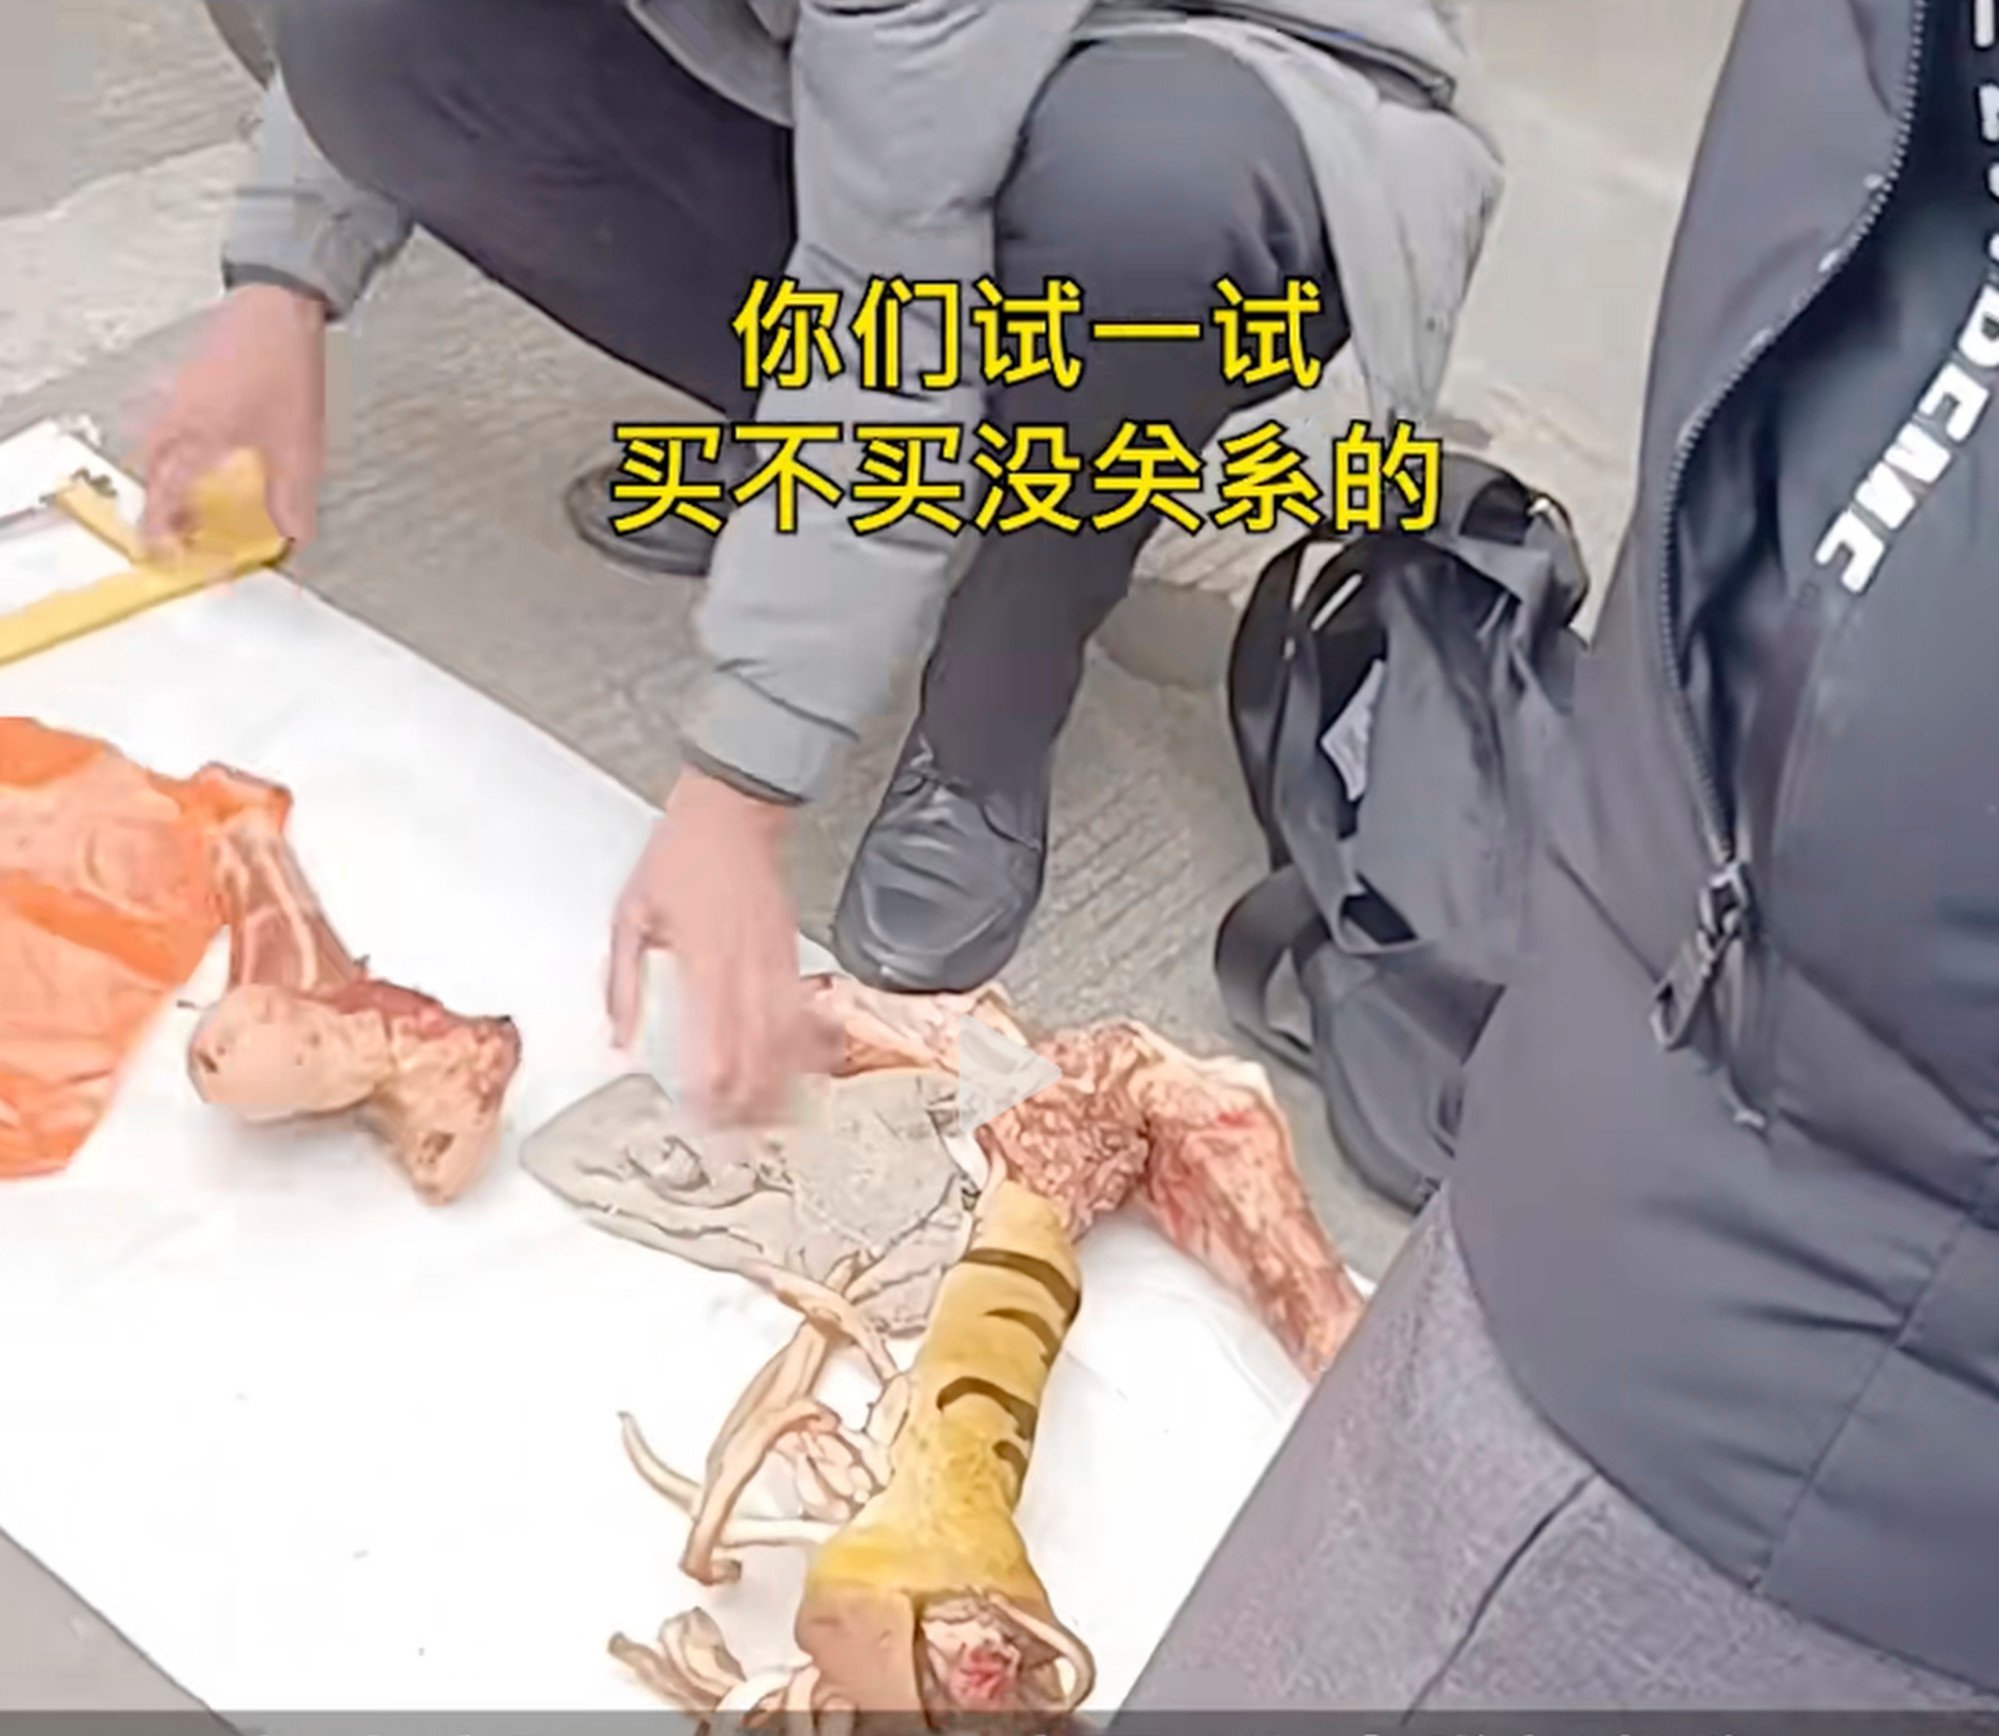 The vendors were caught trying to sell the fake tiger bones at a market in southern China. Photo: Douyin